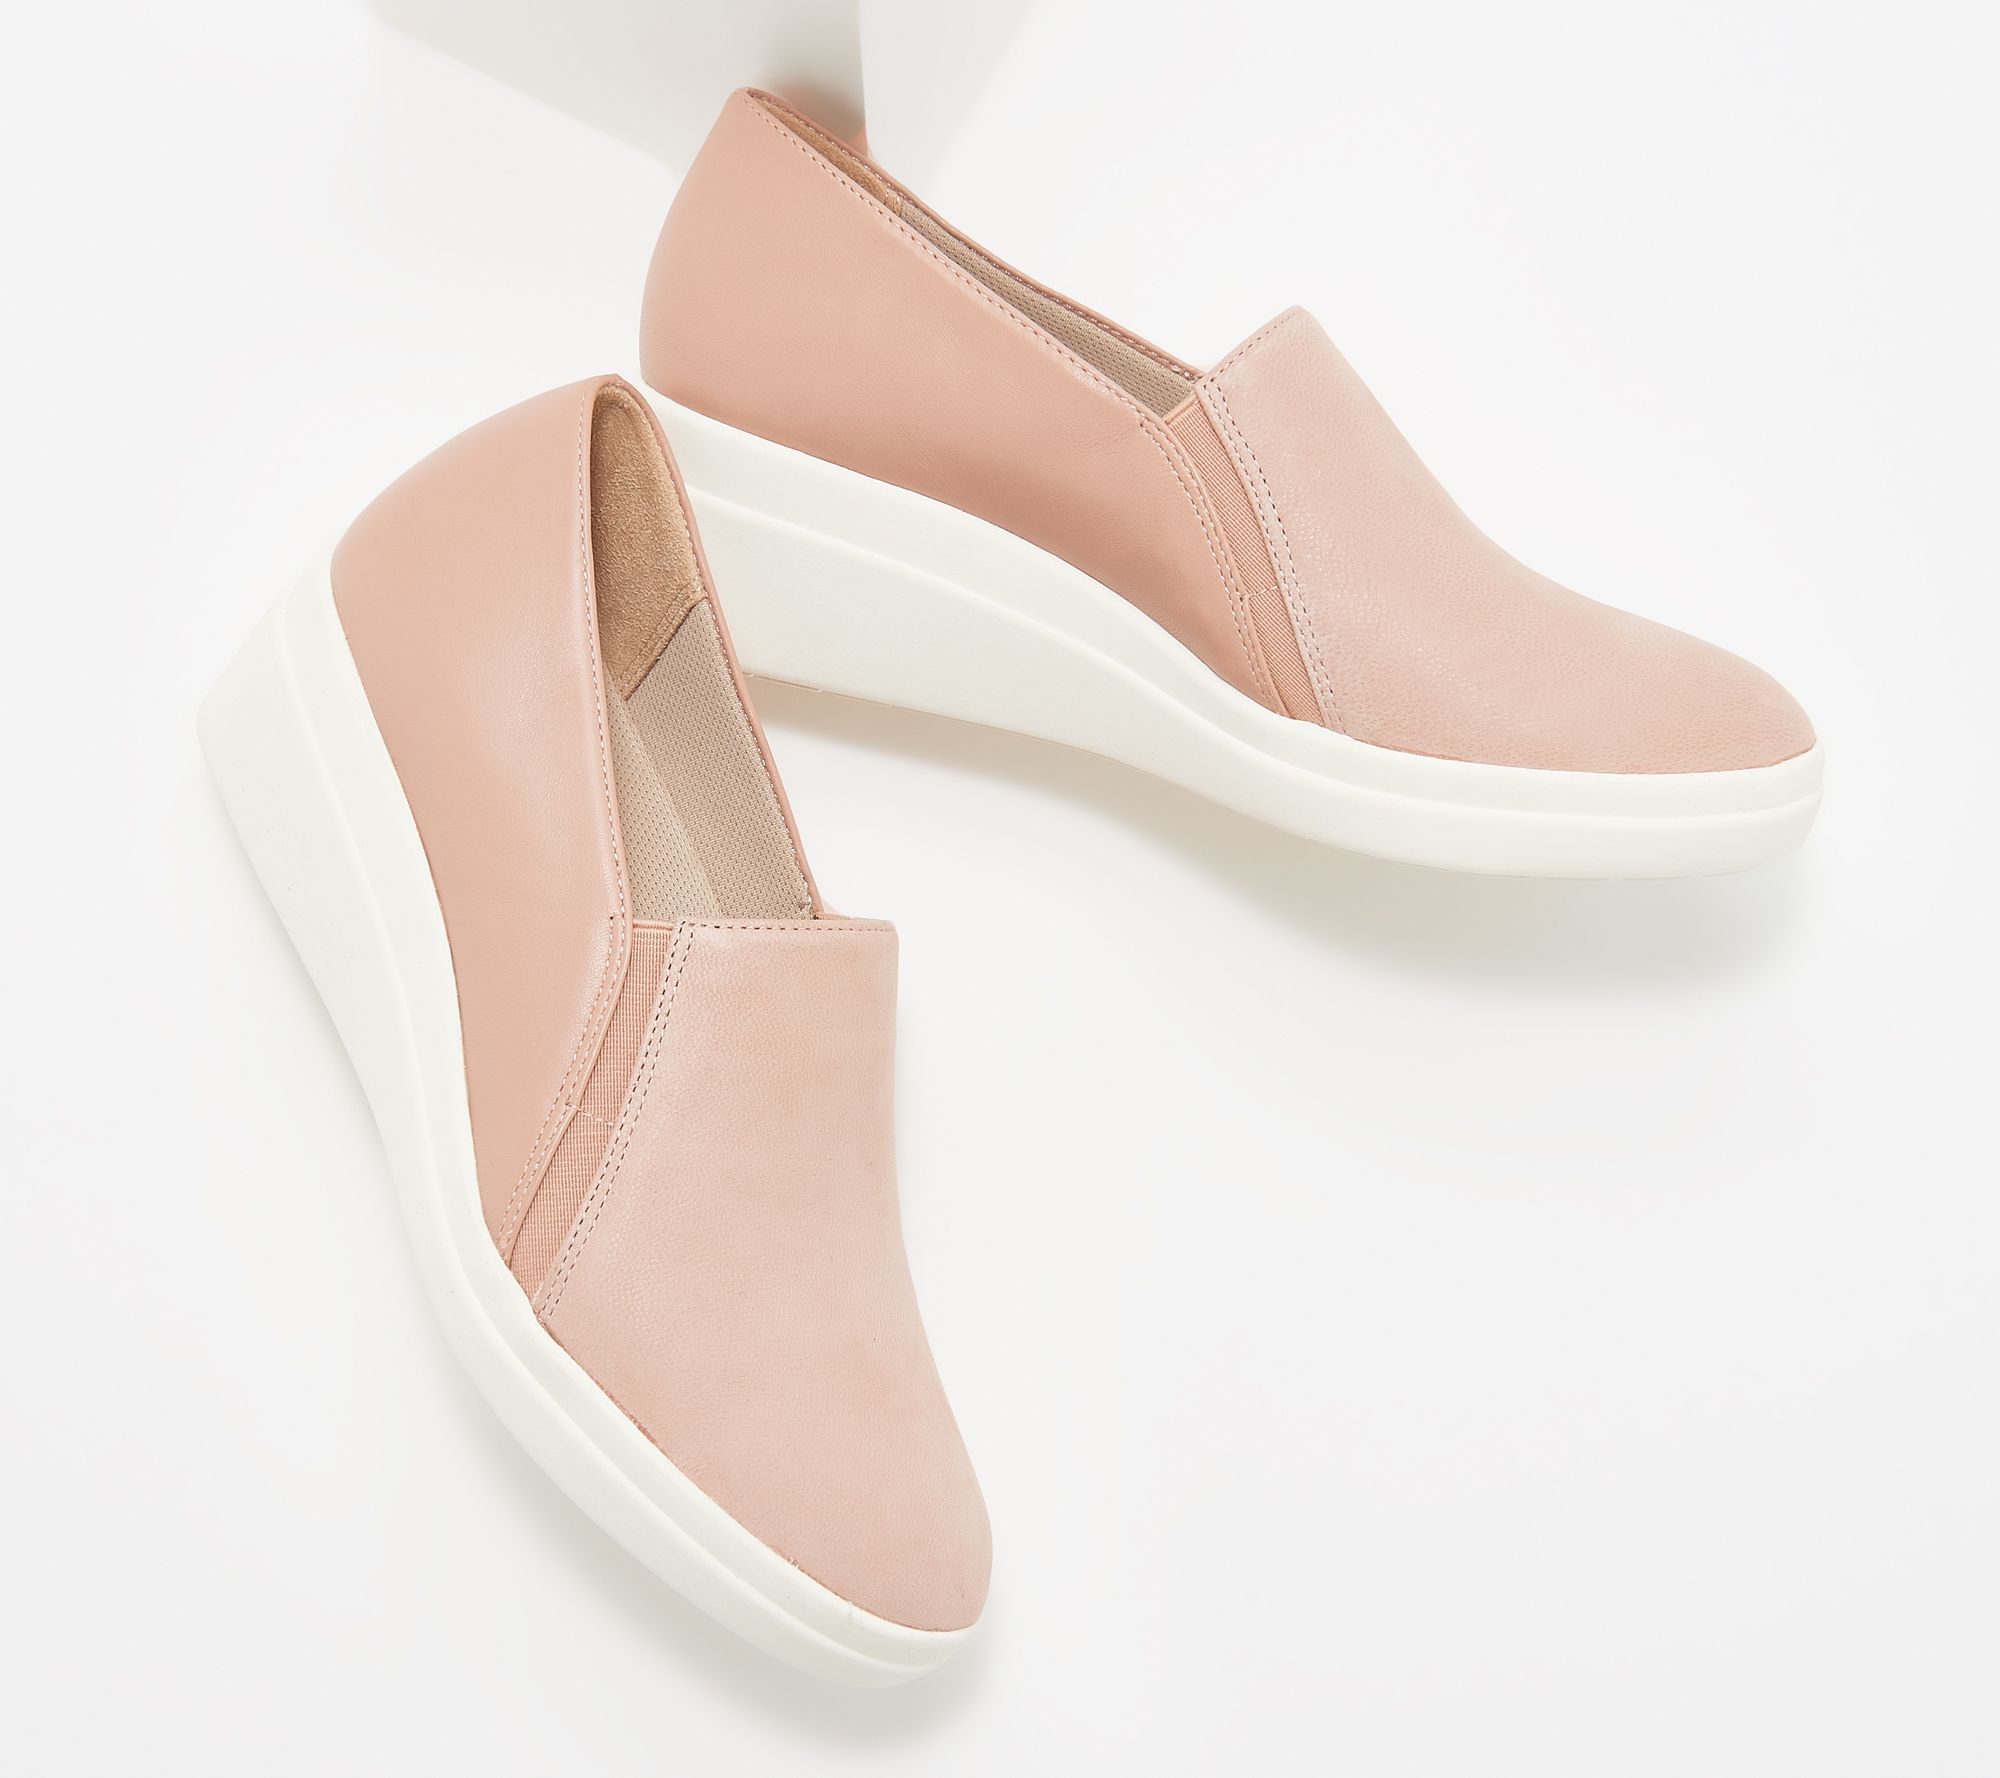 Naturalizer Slip-On Wedge Shoes - Snowy 